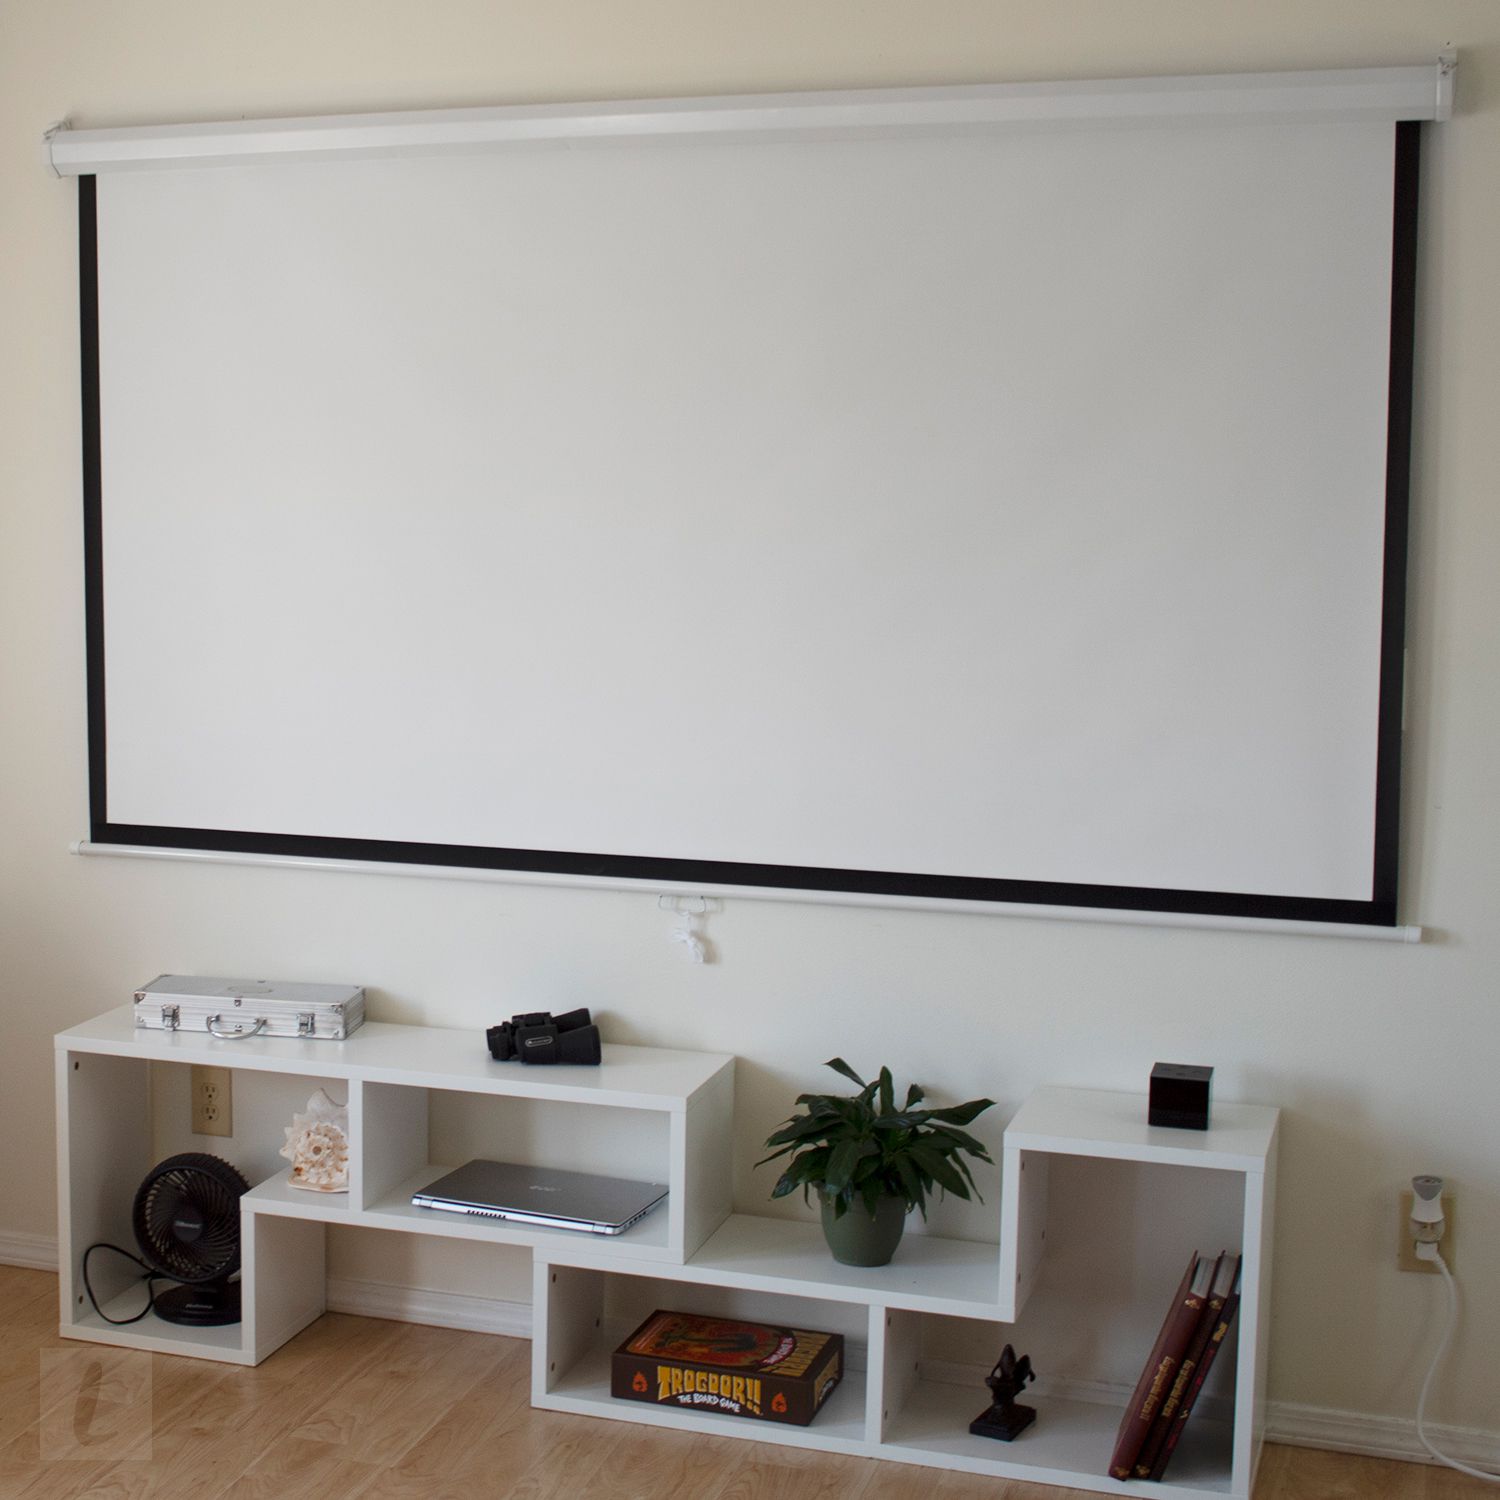 Which Projector Screen Is Best